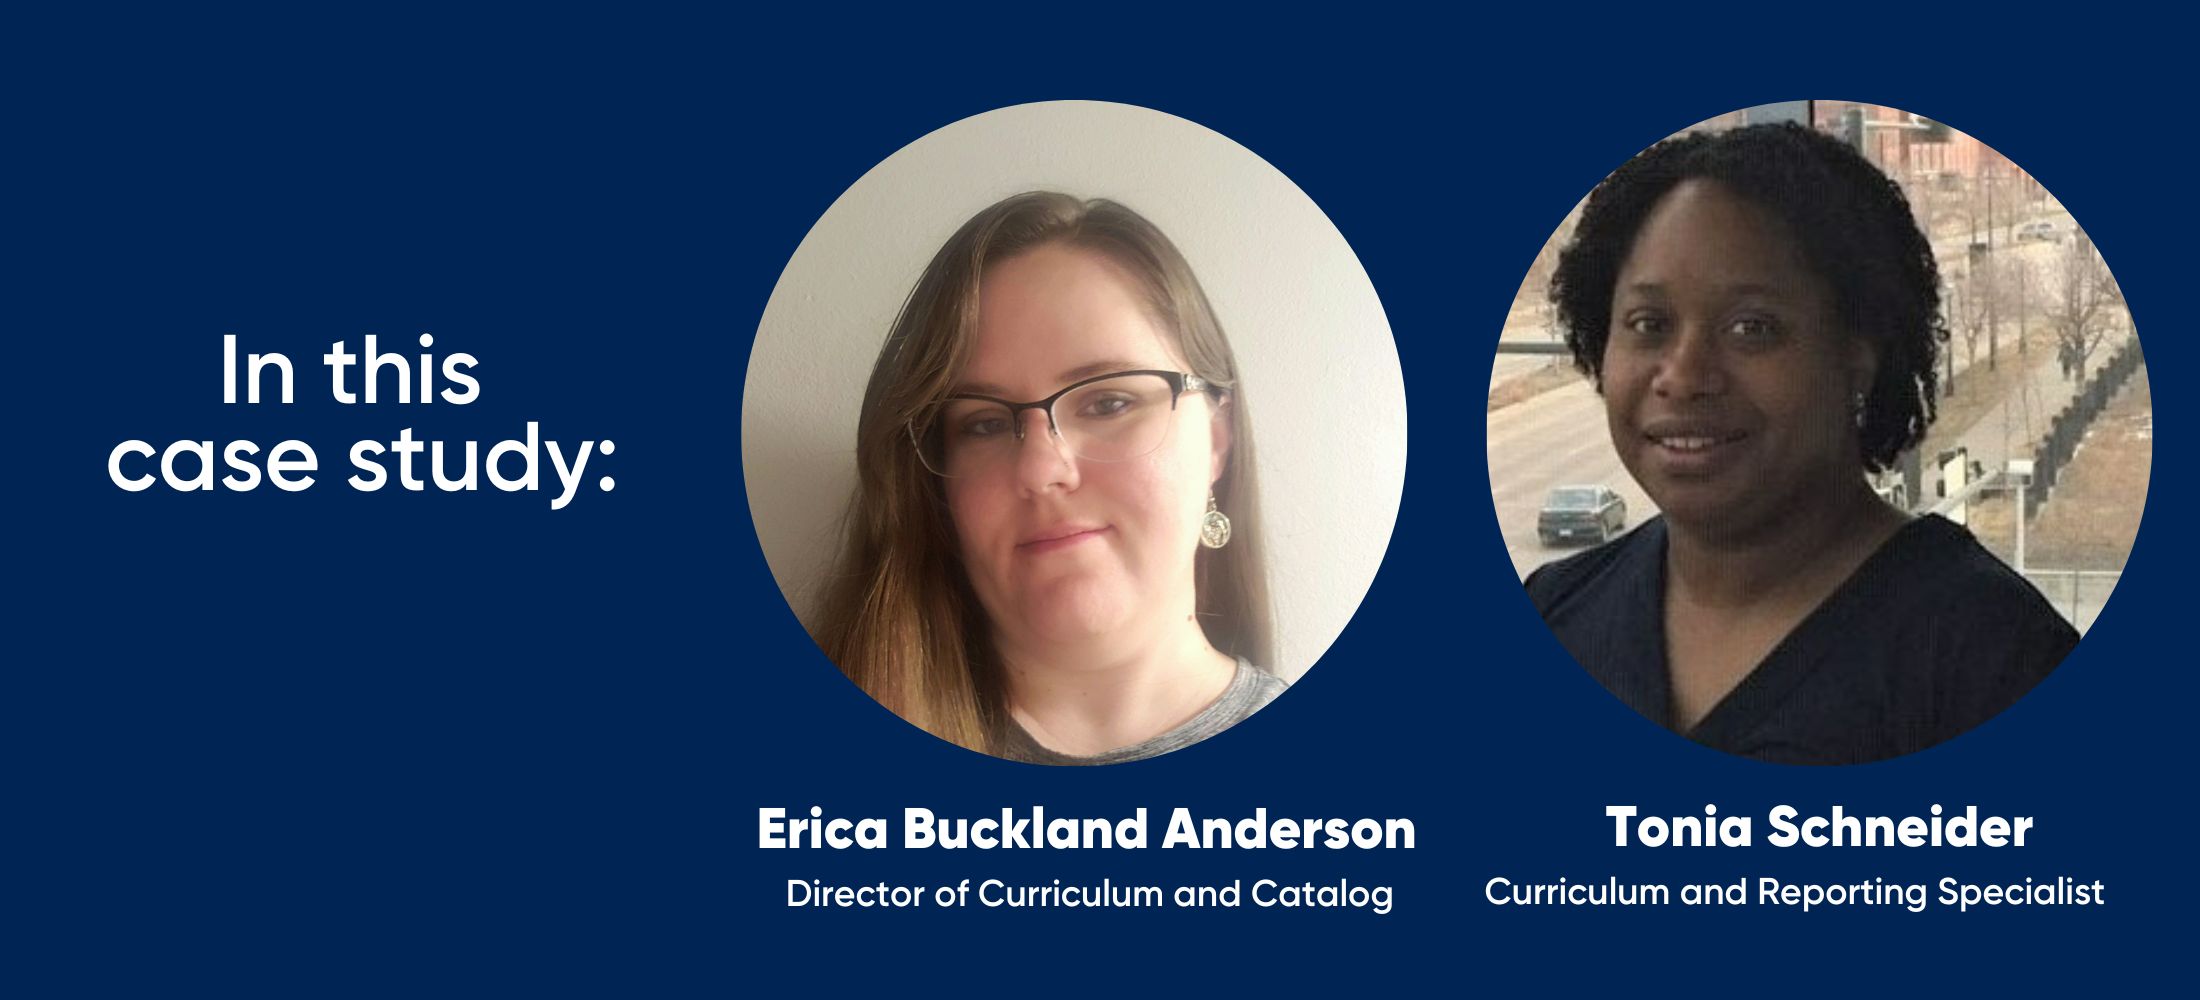 in this case study: Erica Buckland Anderson and Tonia Schneider